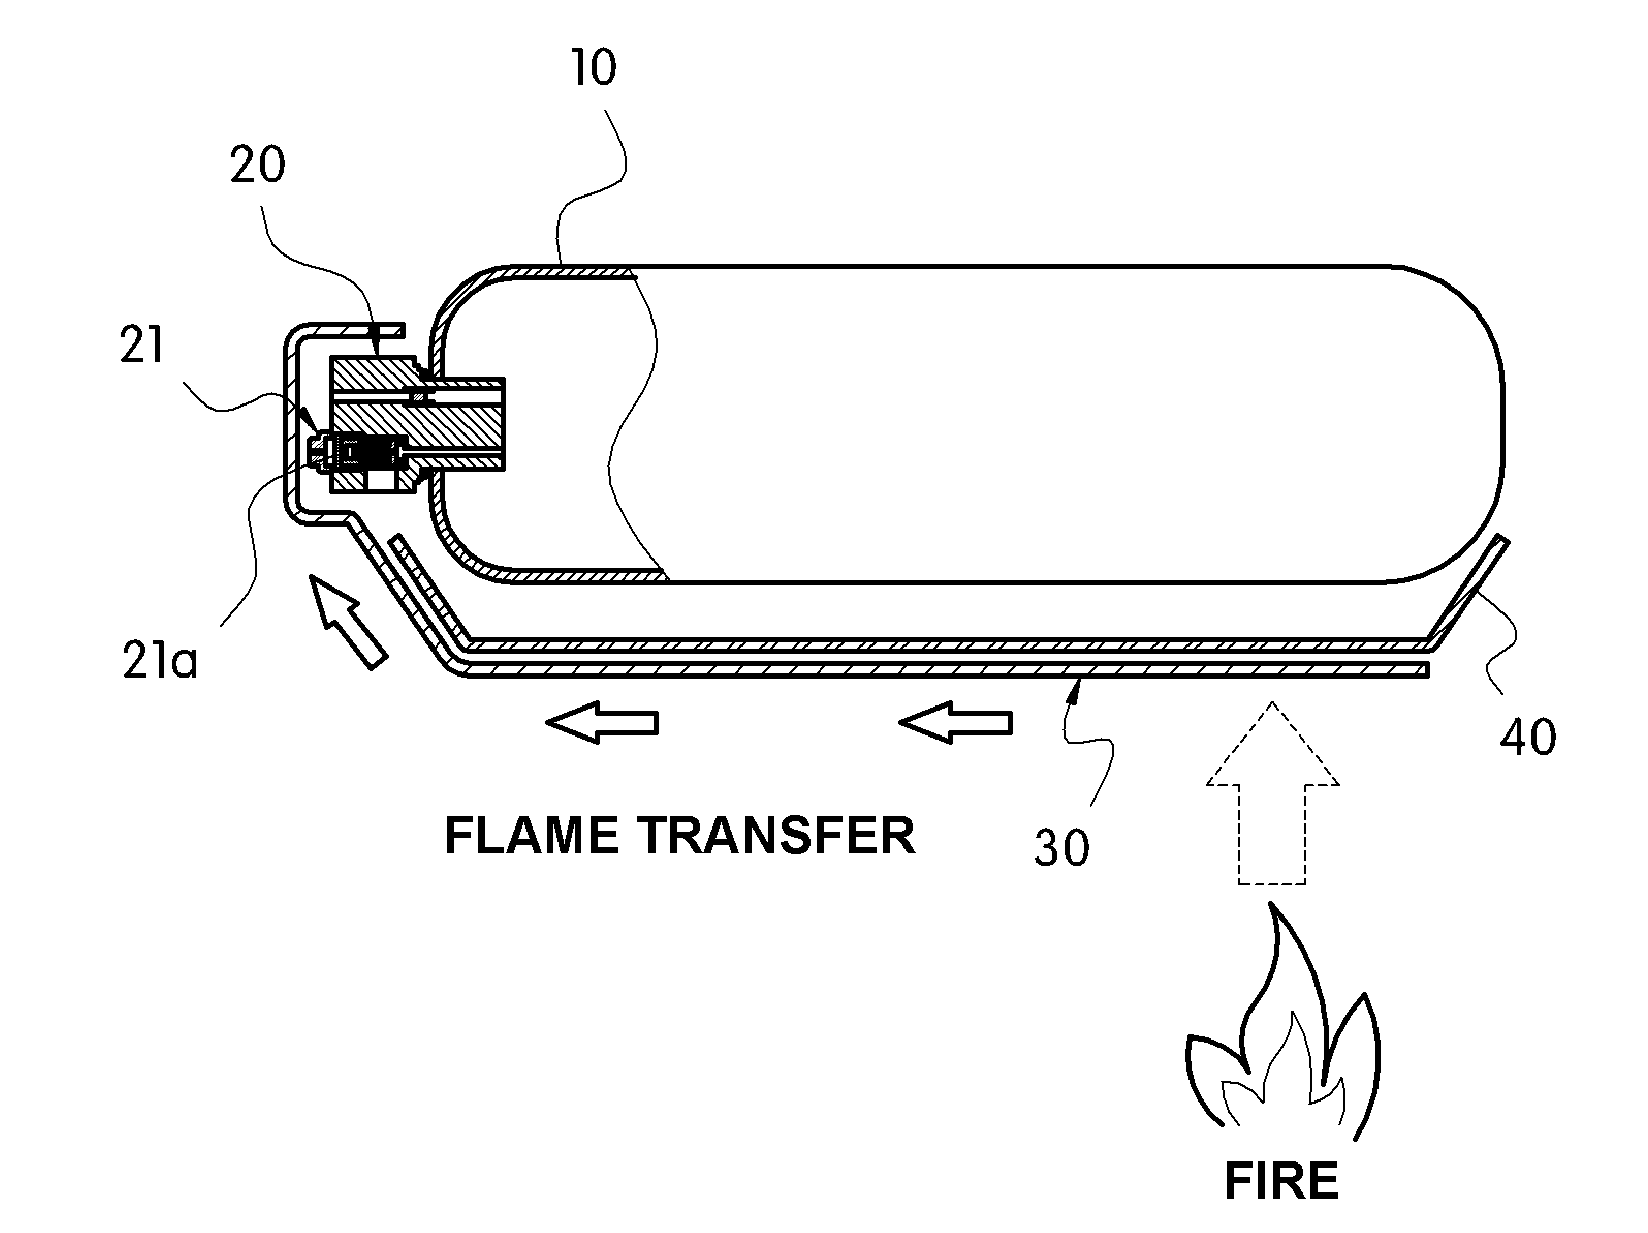 Fire safety apparatus for high-pressure gas storage system